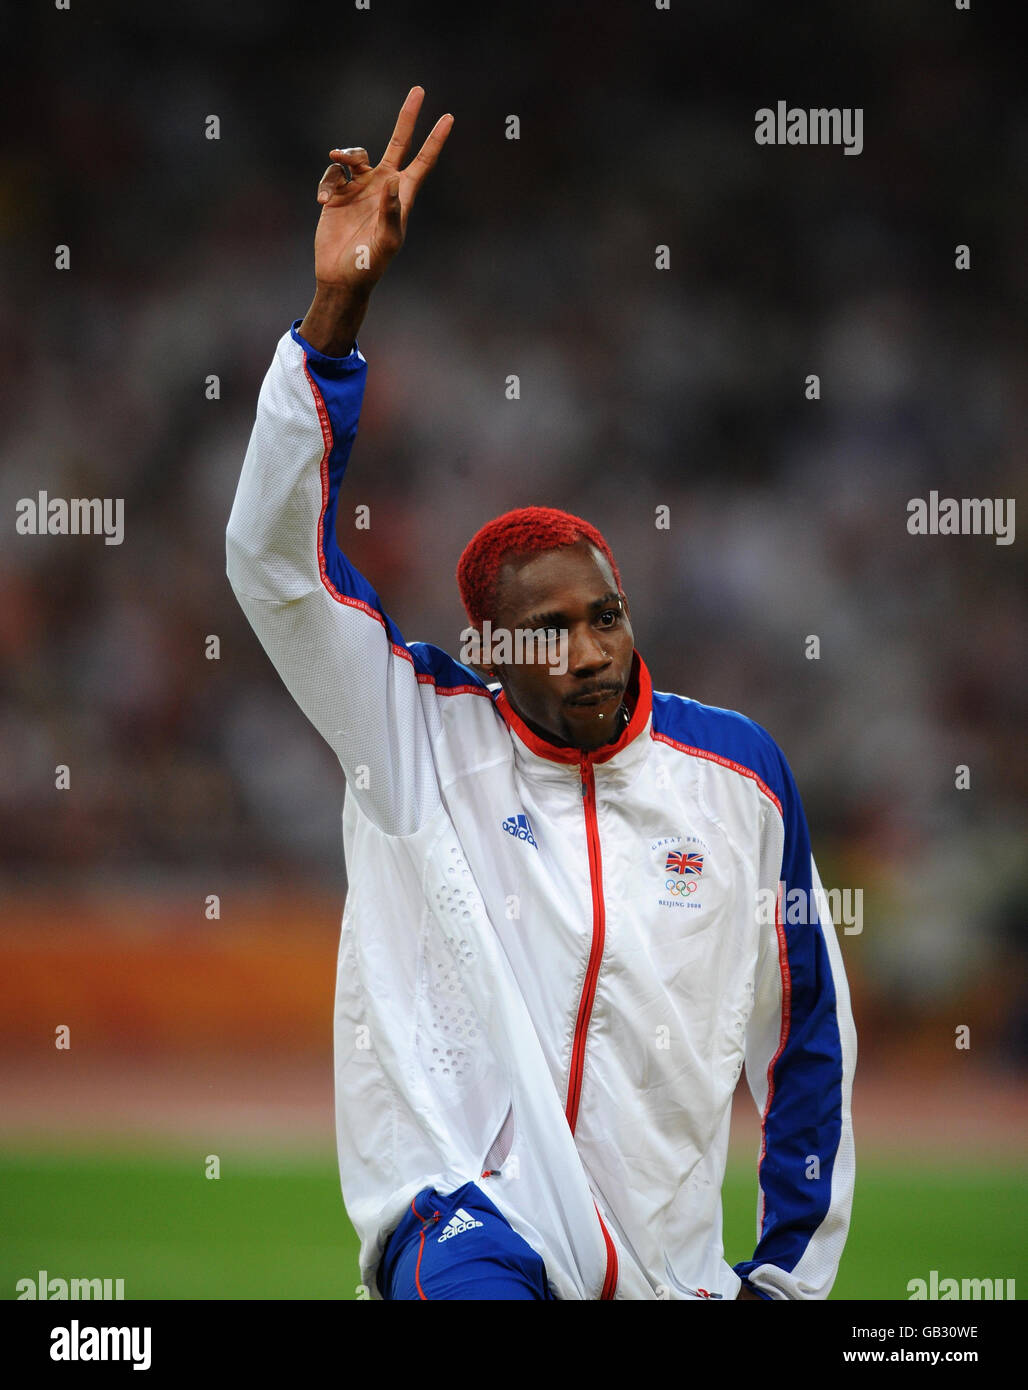 Great Britain's Phillips Idowu at the medal ceremony for the Men's Triple Jump at the National Stadium in Beijing during the 2008 Beijing Olympic Games in China. Stock Photo